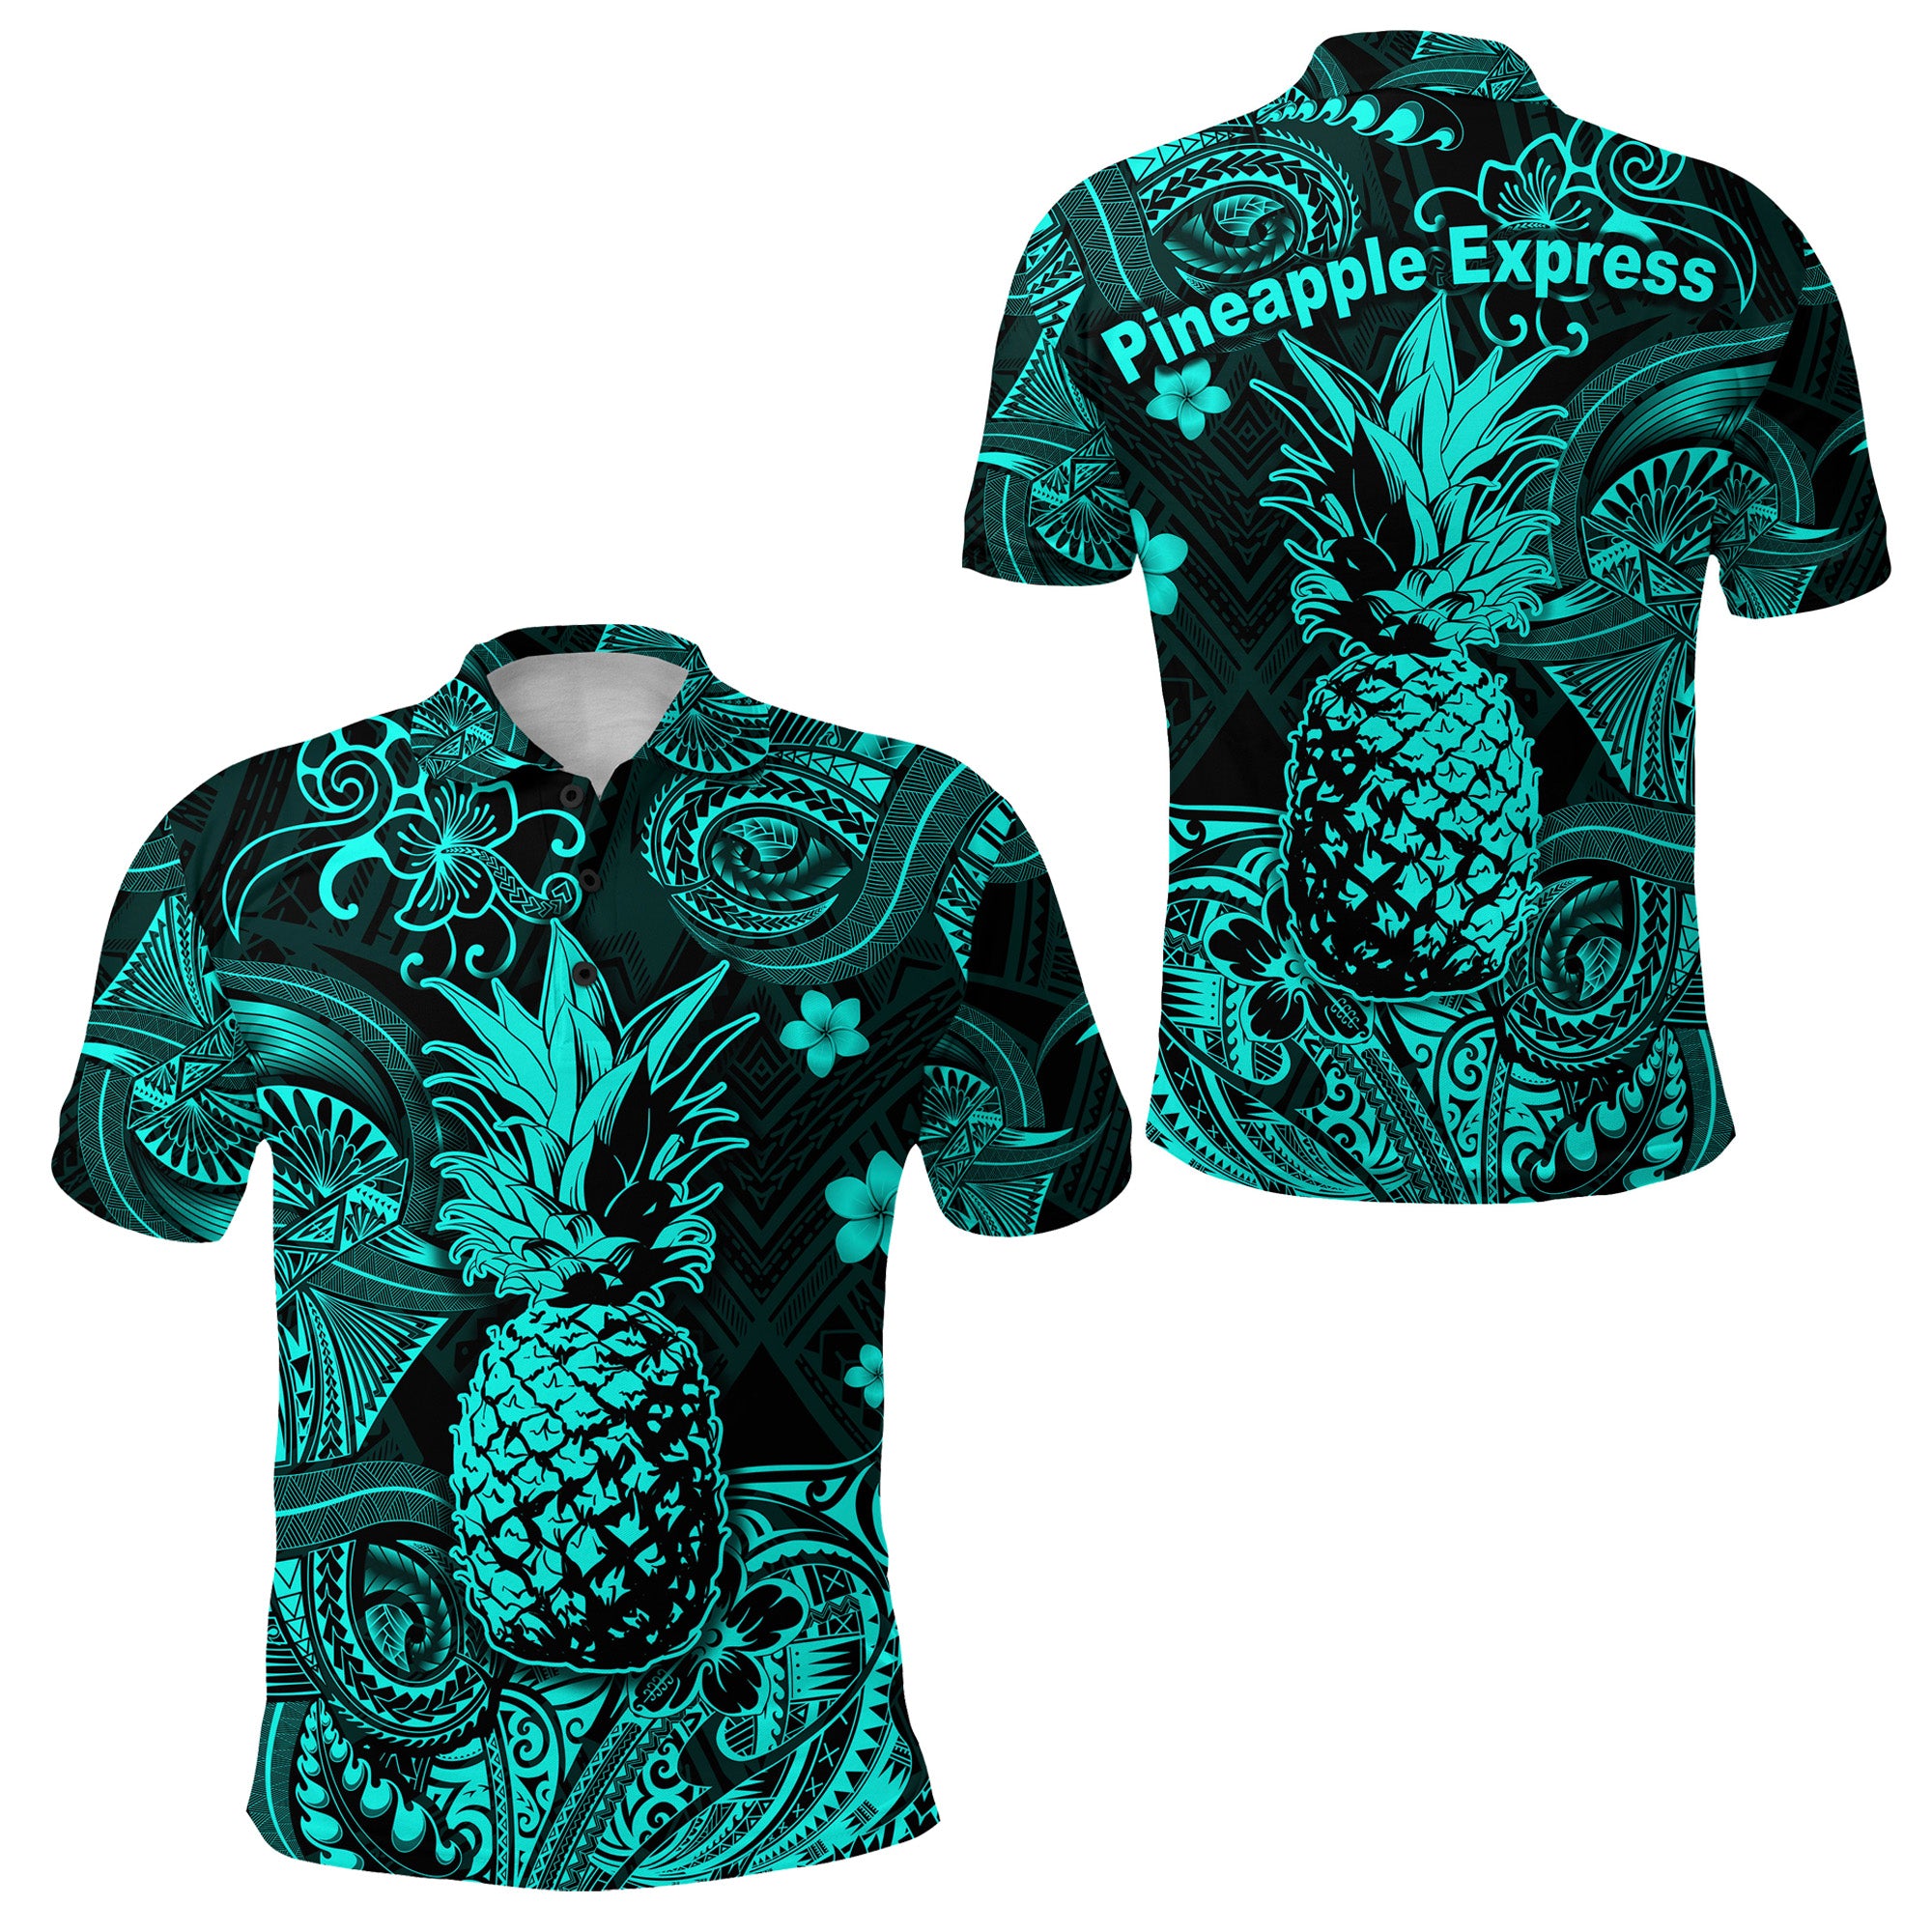 (Pineapple Express) Hawaii Pineapple Polynesian Polo Shirt Unique Style Turquoise LT8 Turquoise - Polynesian Pride